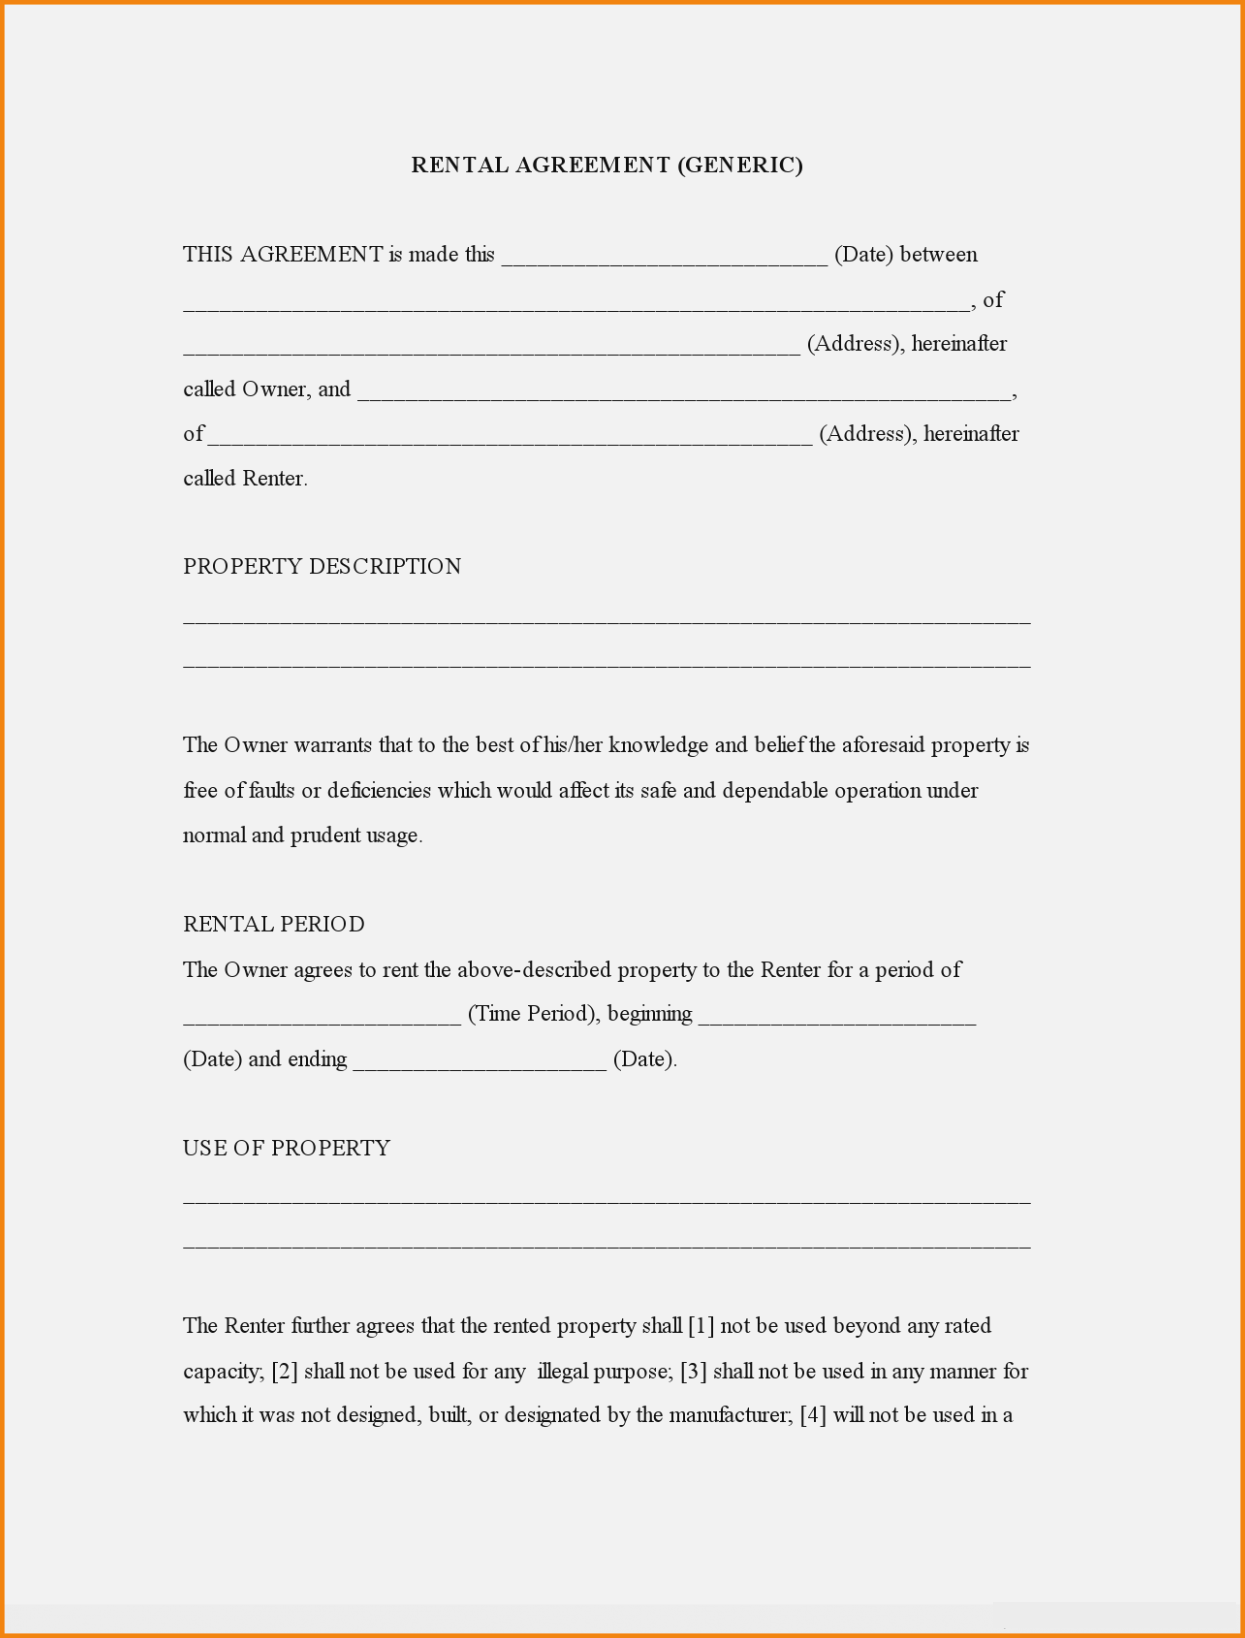 rental-agreement-form-fillable-printable-forms-free-online